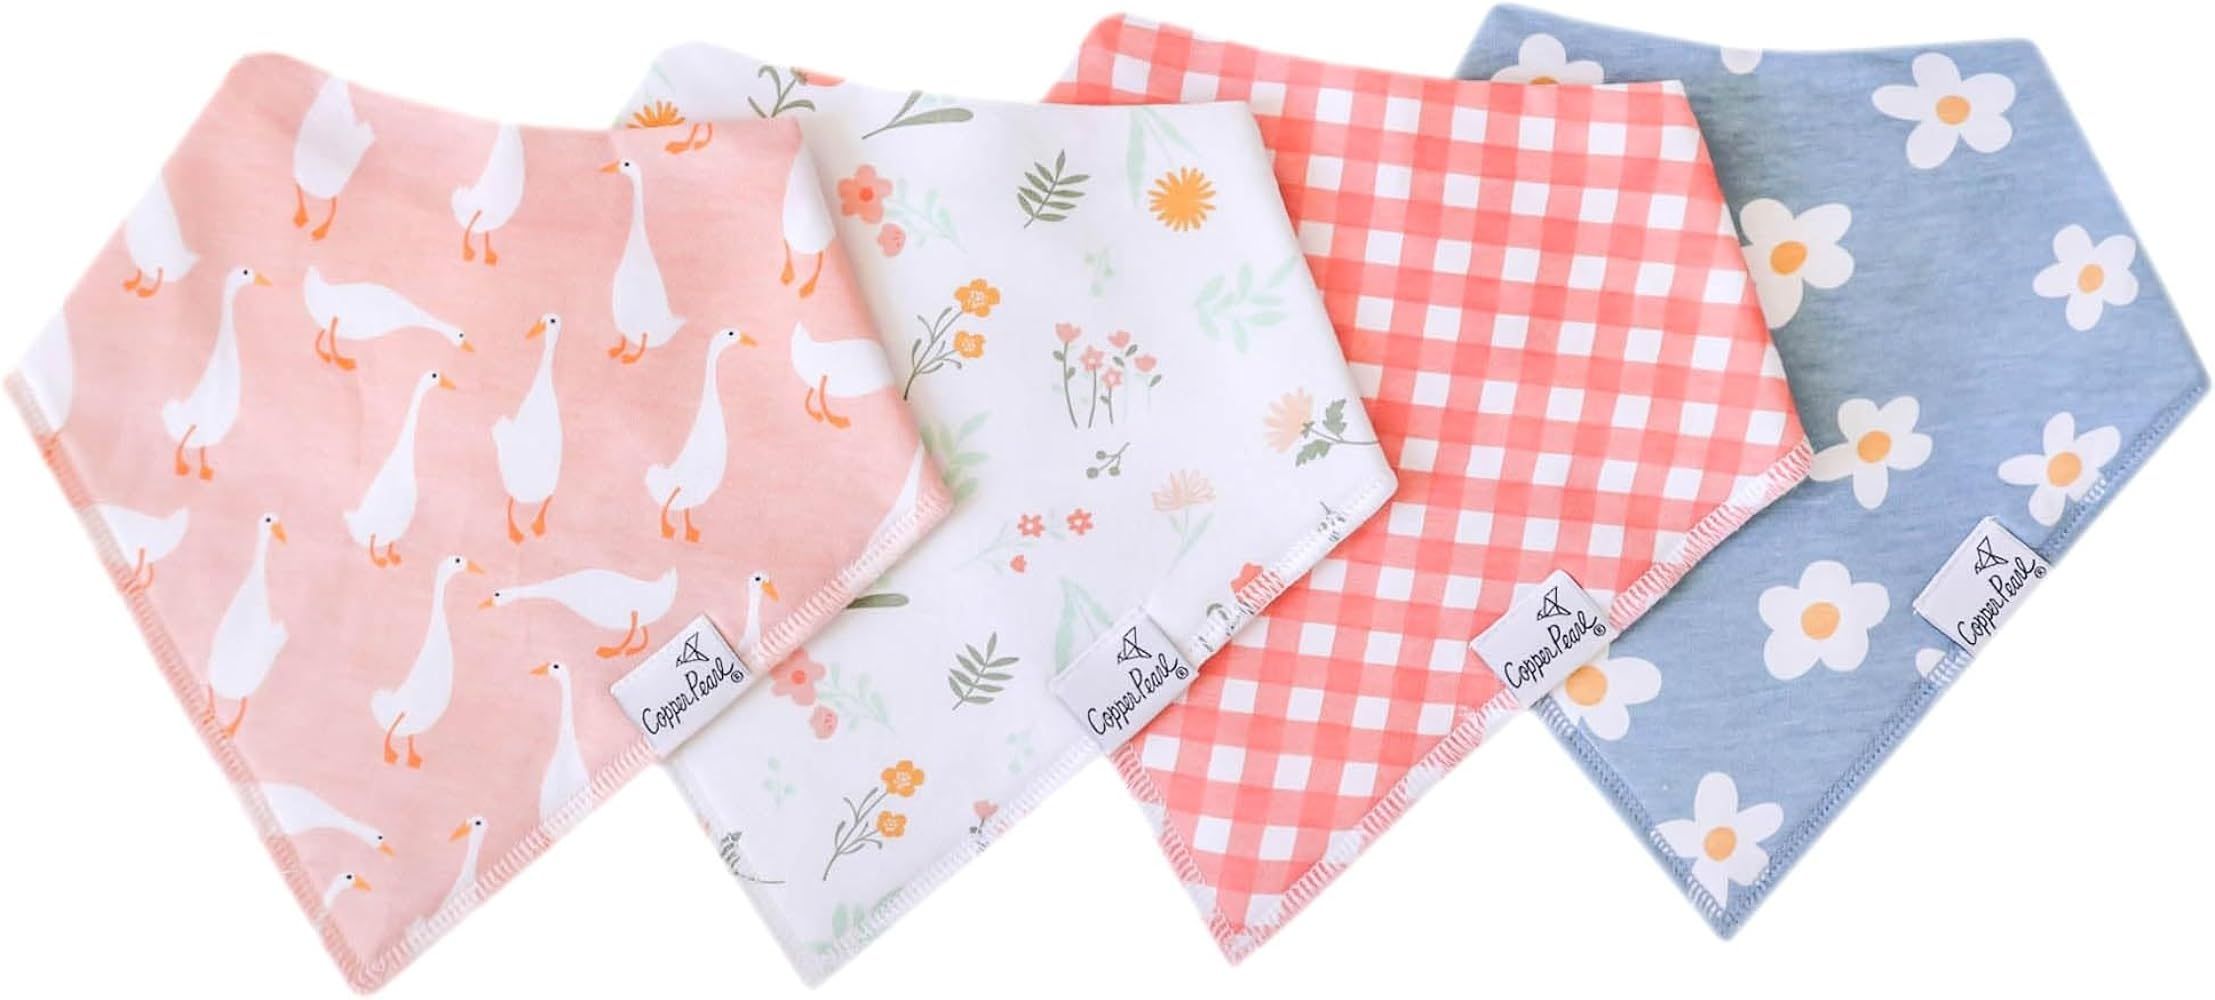 Copper Pearl, Baby Bandana Drool Bibs for Drooling and Teething 4 Pack Gift Set-graphic | Amazon (US)